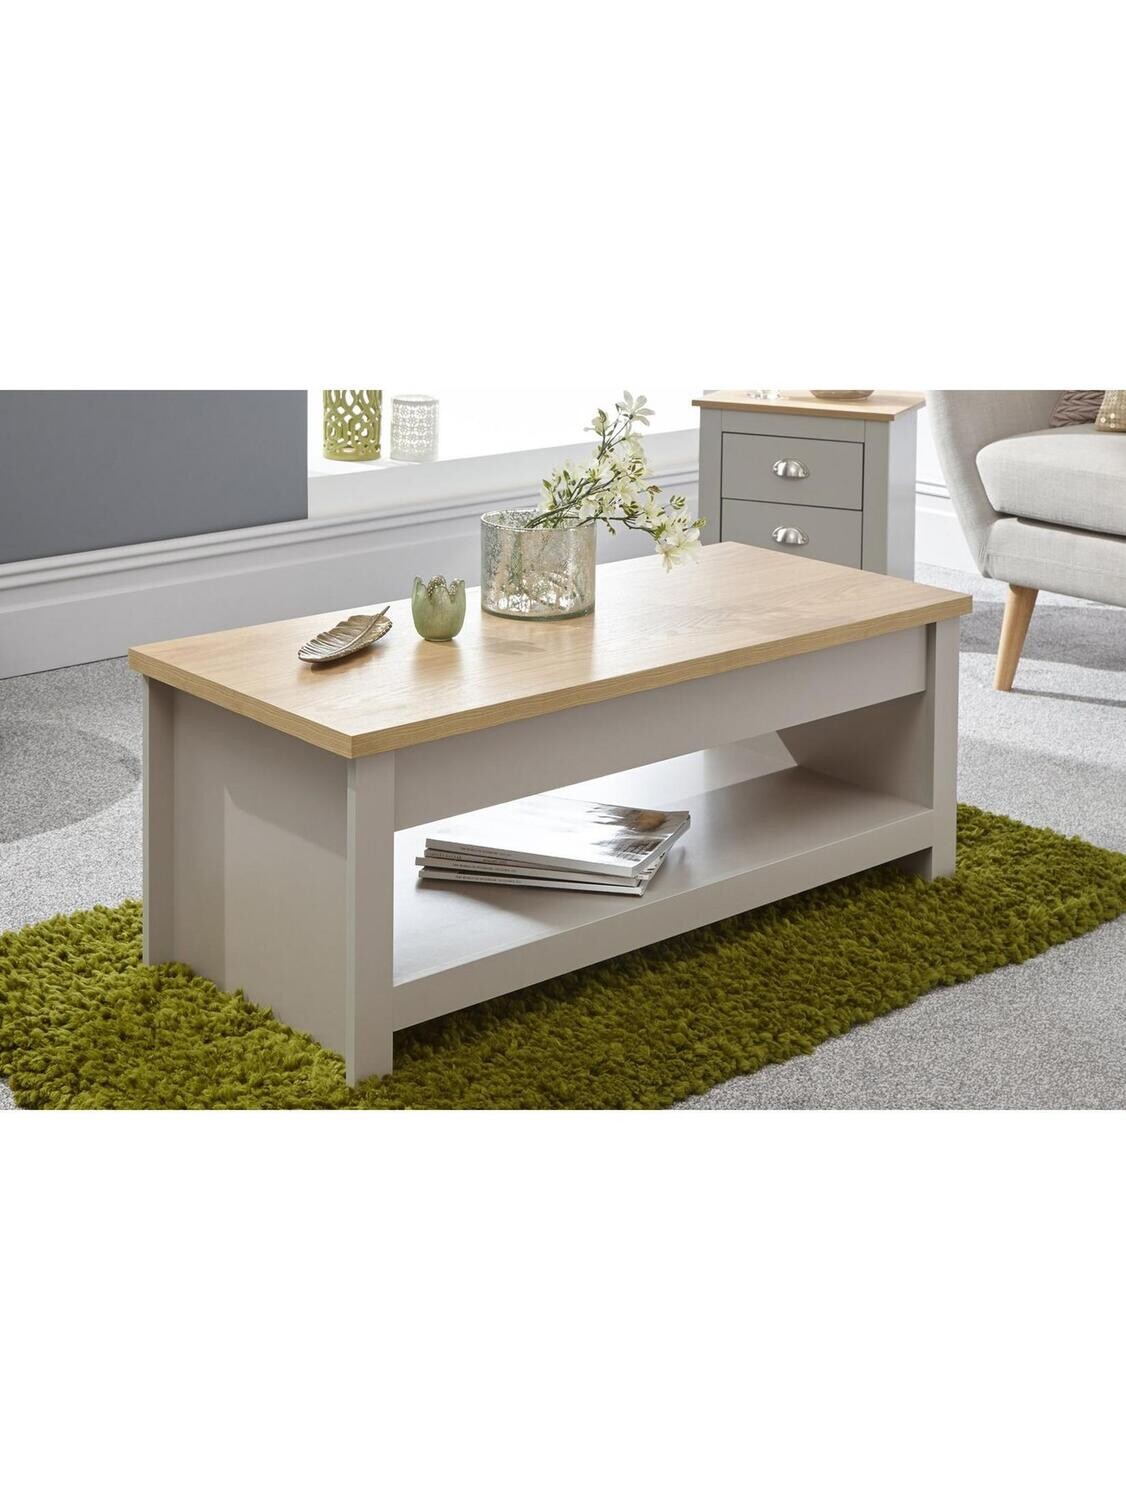 Lancaster Lift Up Coffee Table - Grey - Height 42, Width 105, Depth 47 cm